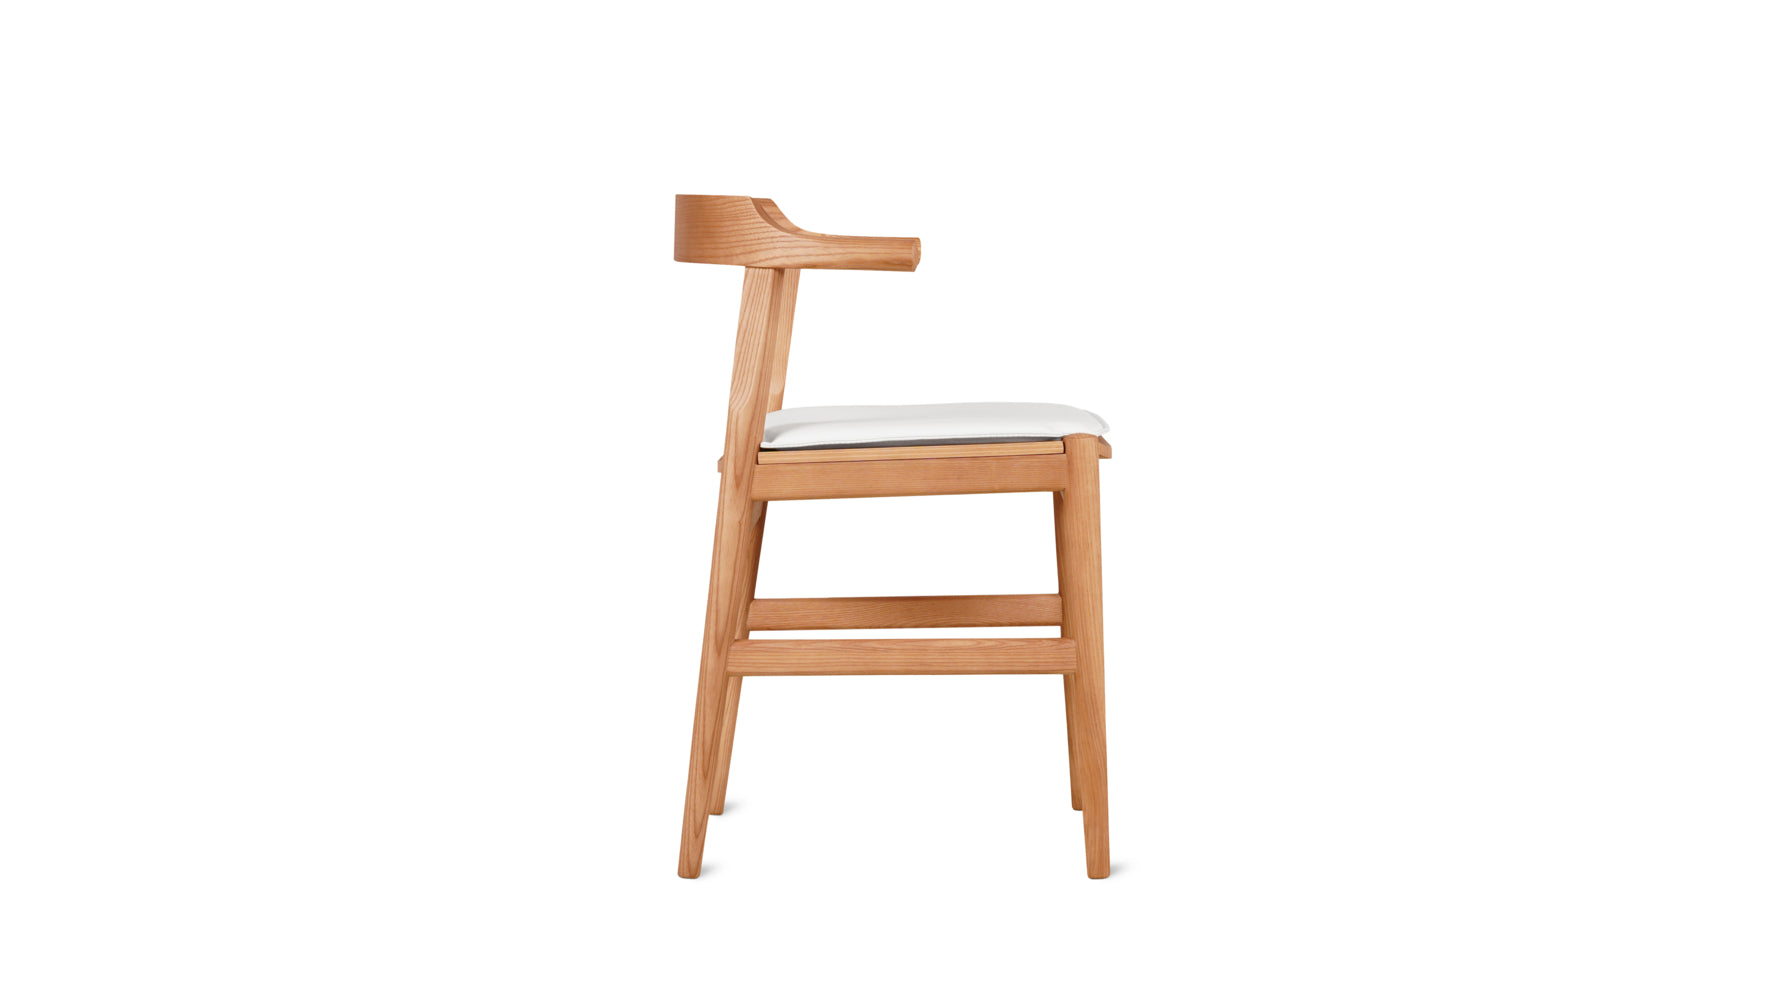 Tuck In Dining Chair with Cushion, White Oak, Wood Seat with White Cushion - Image 5